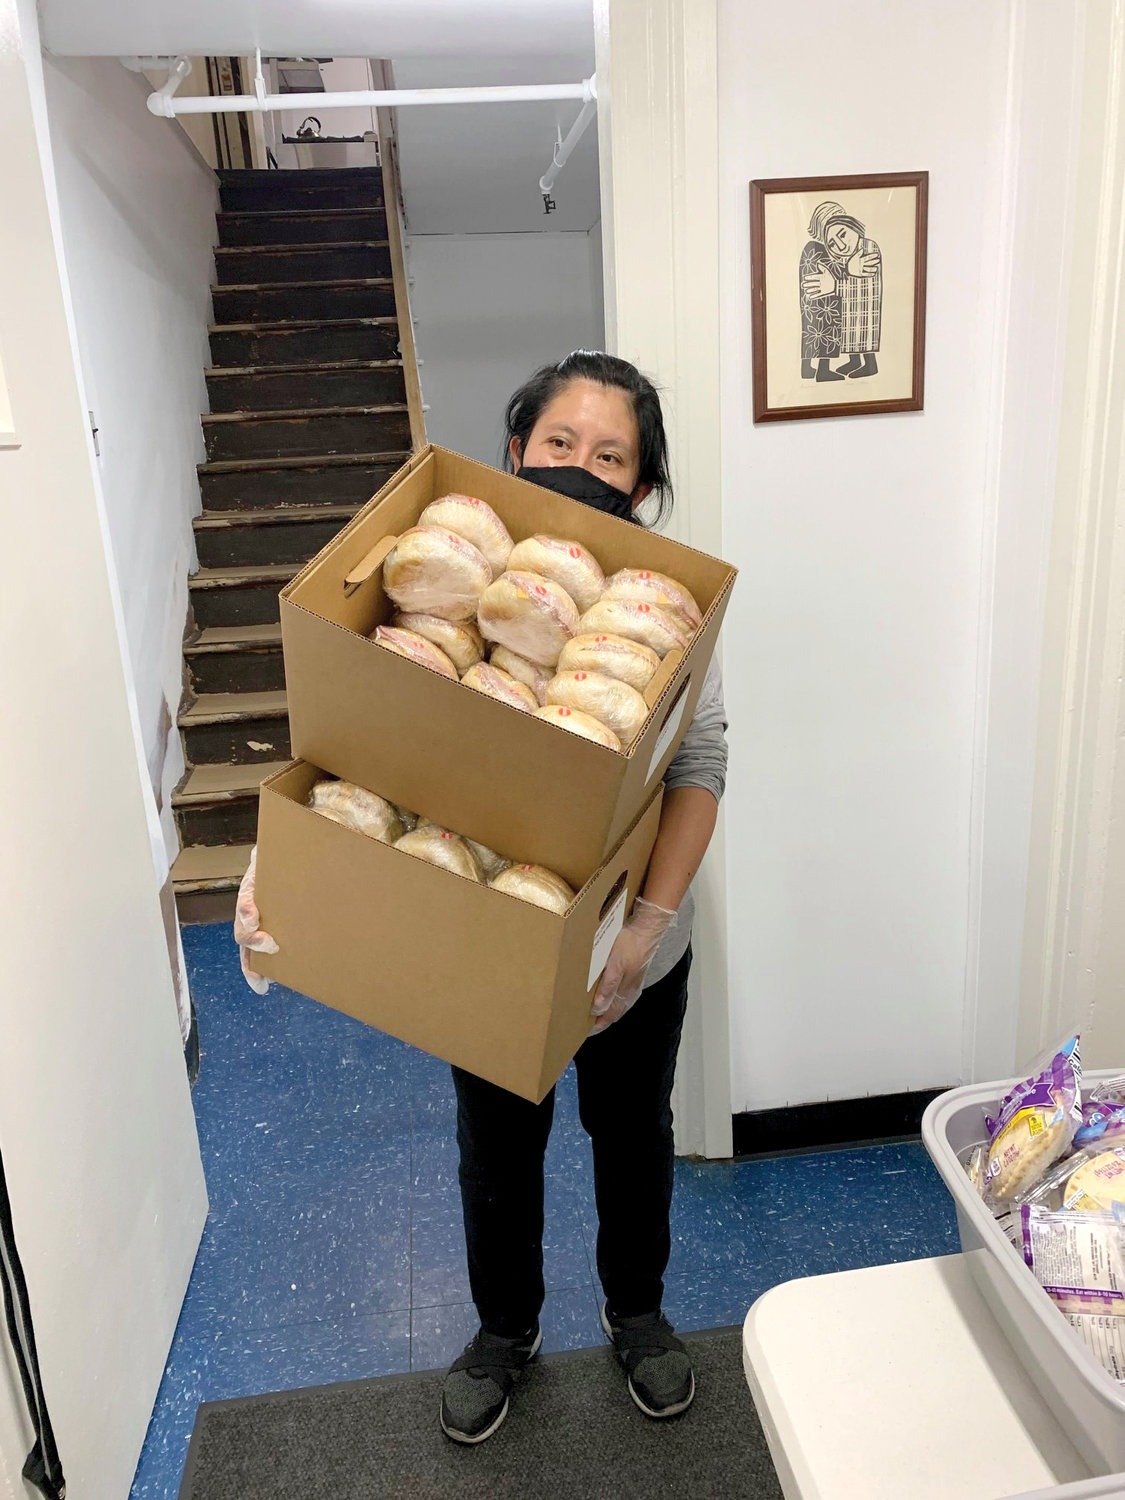 COMMUNITY DINNER—Luisa Mendez-Vega, a 20-year staff member of The Dwelling Place of New York, carries boxes of sandwiches for distribution at a Wednesday take-out dinner for former residents as well as members of the local community. The Manhattan women’s shelter, which was forced to temporarily shut its doors in June, is planning to reopen in early January.